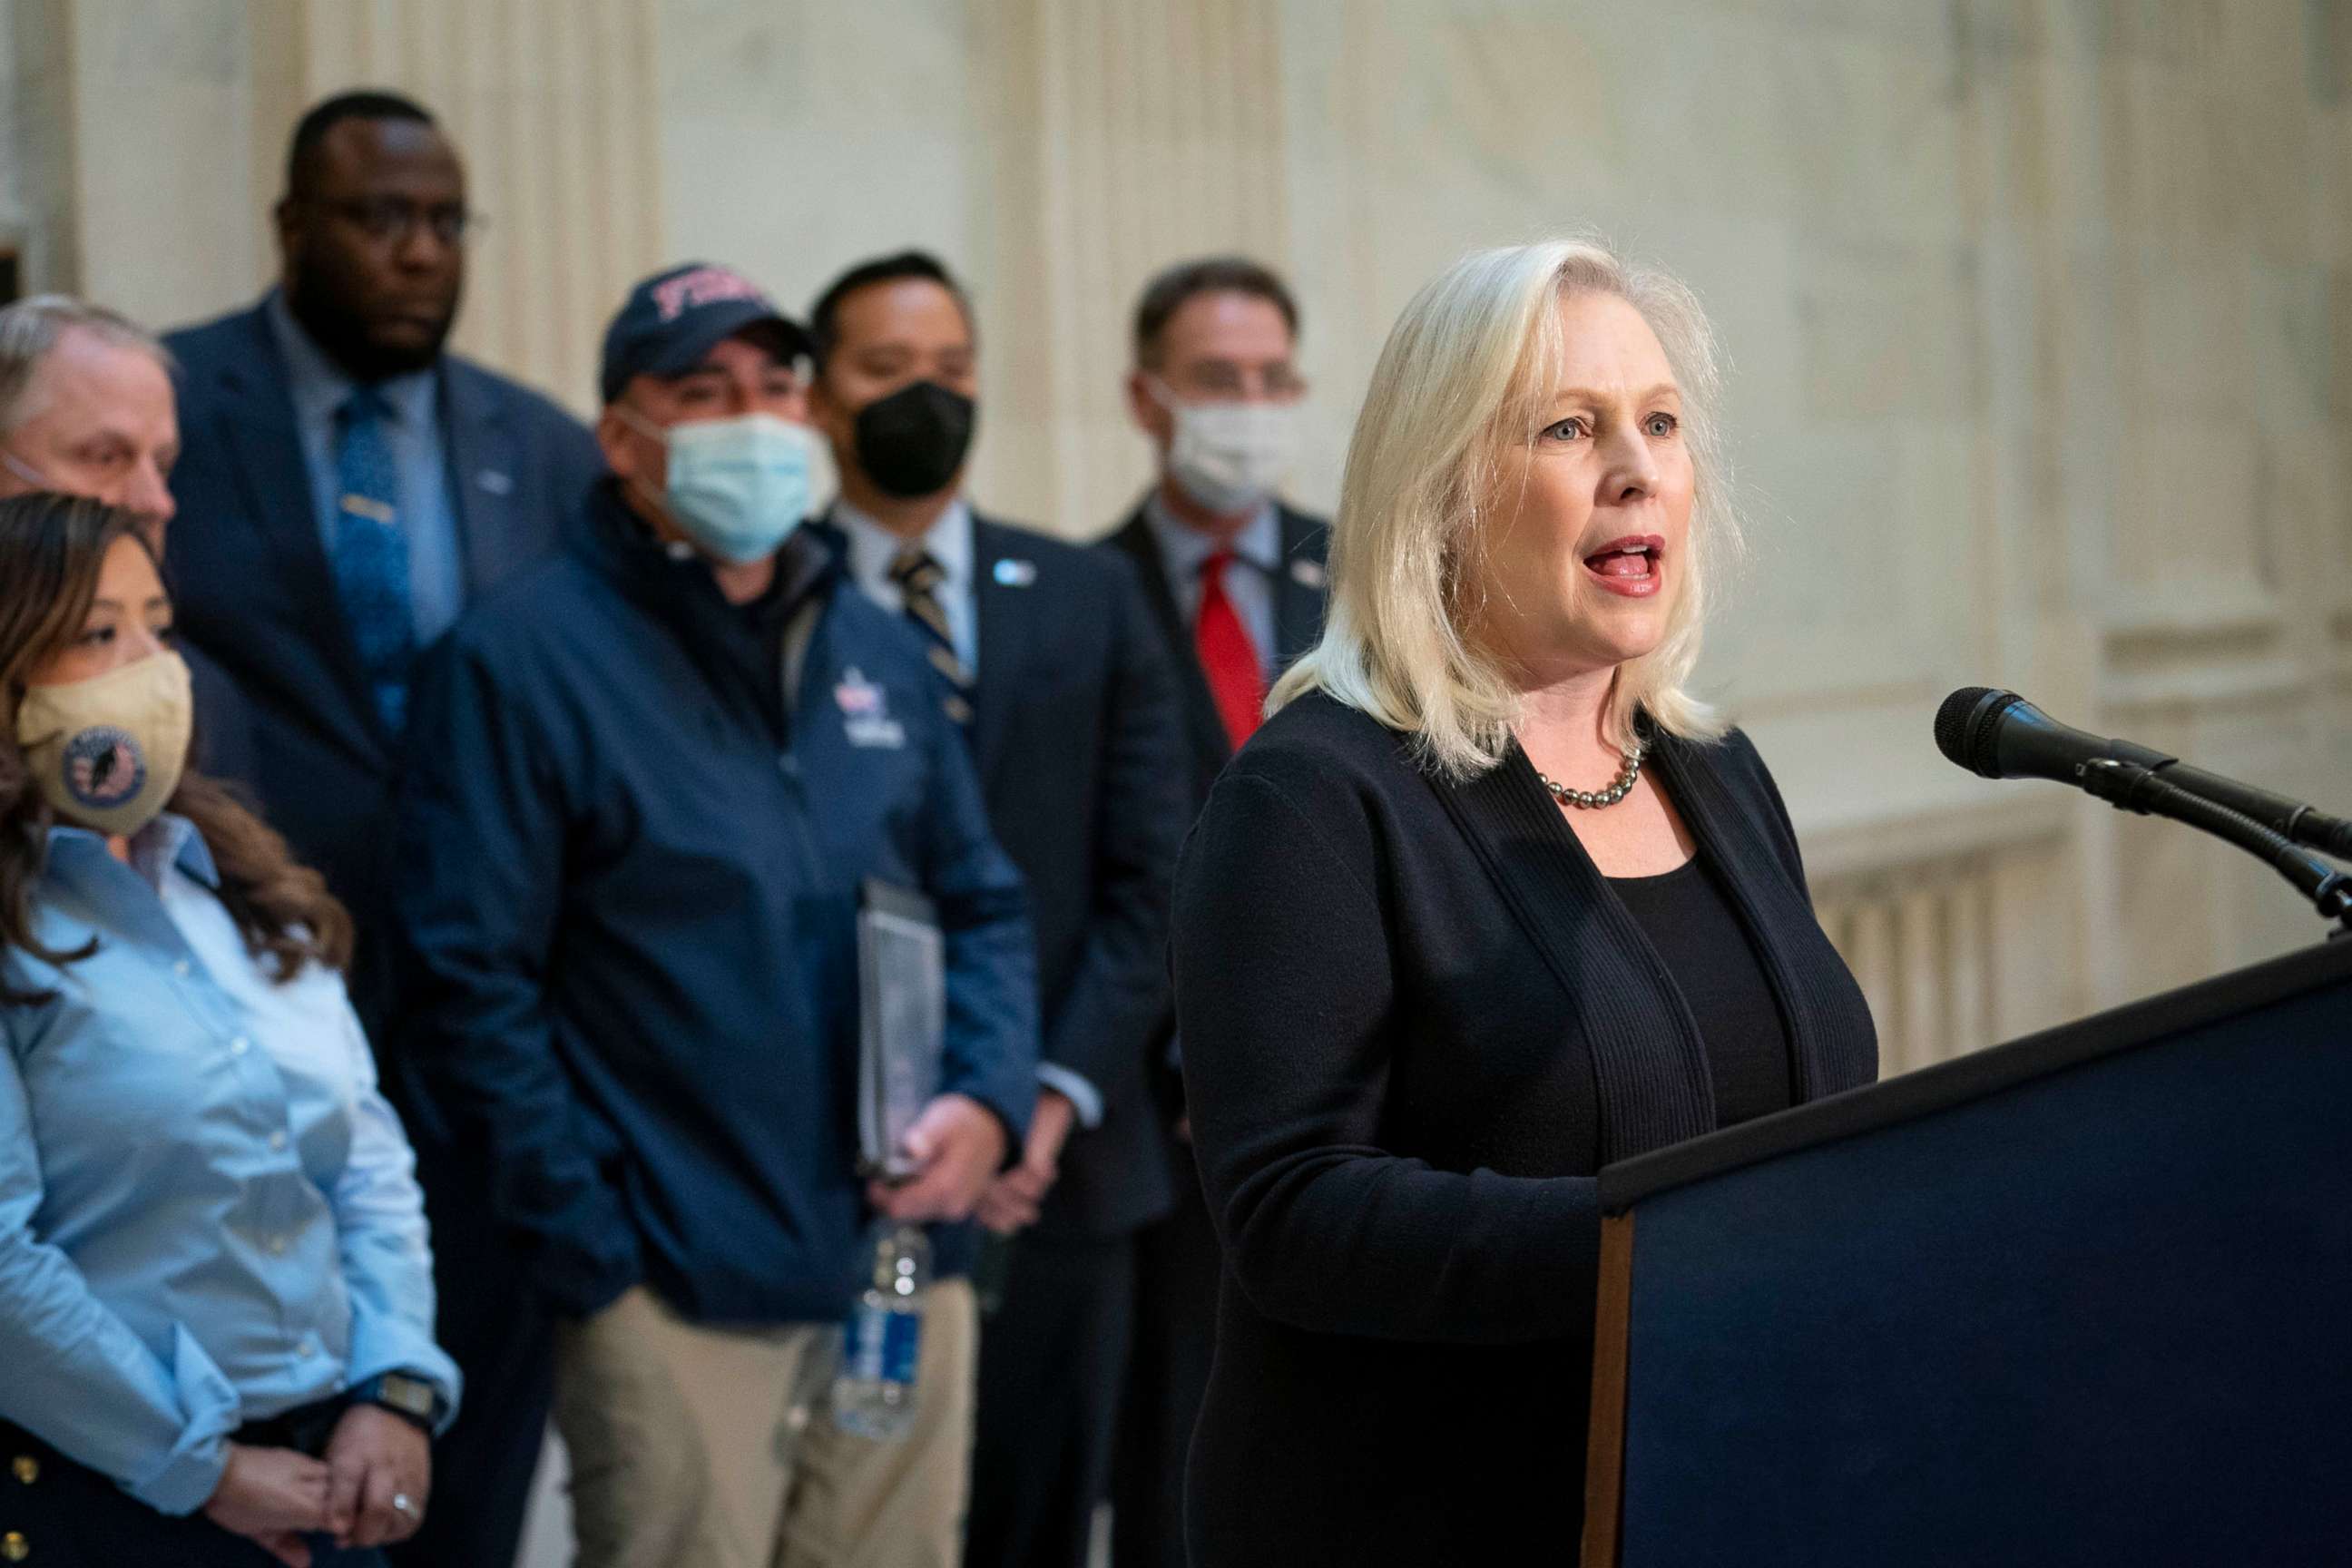 PHOTO: Senator Kirsten Gillibrand speaks during a news conference at the U.S Capitol on Nov. 4, 2021, in Washington, D.C.